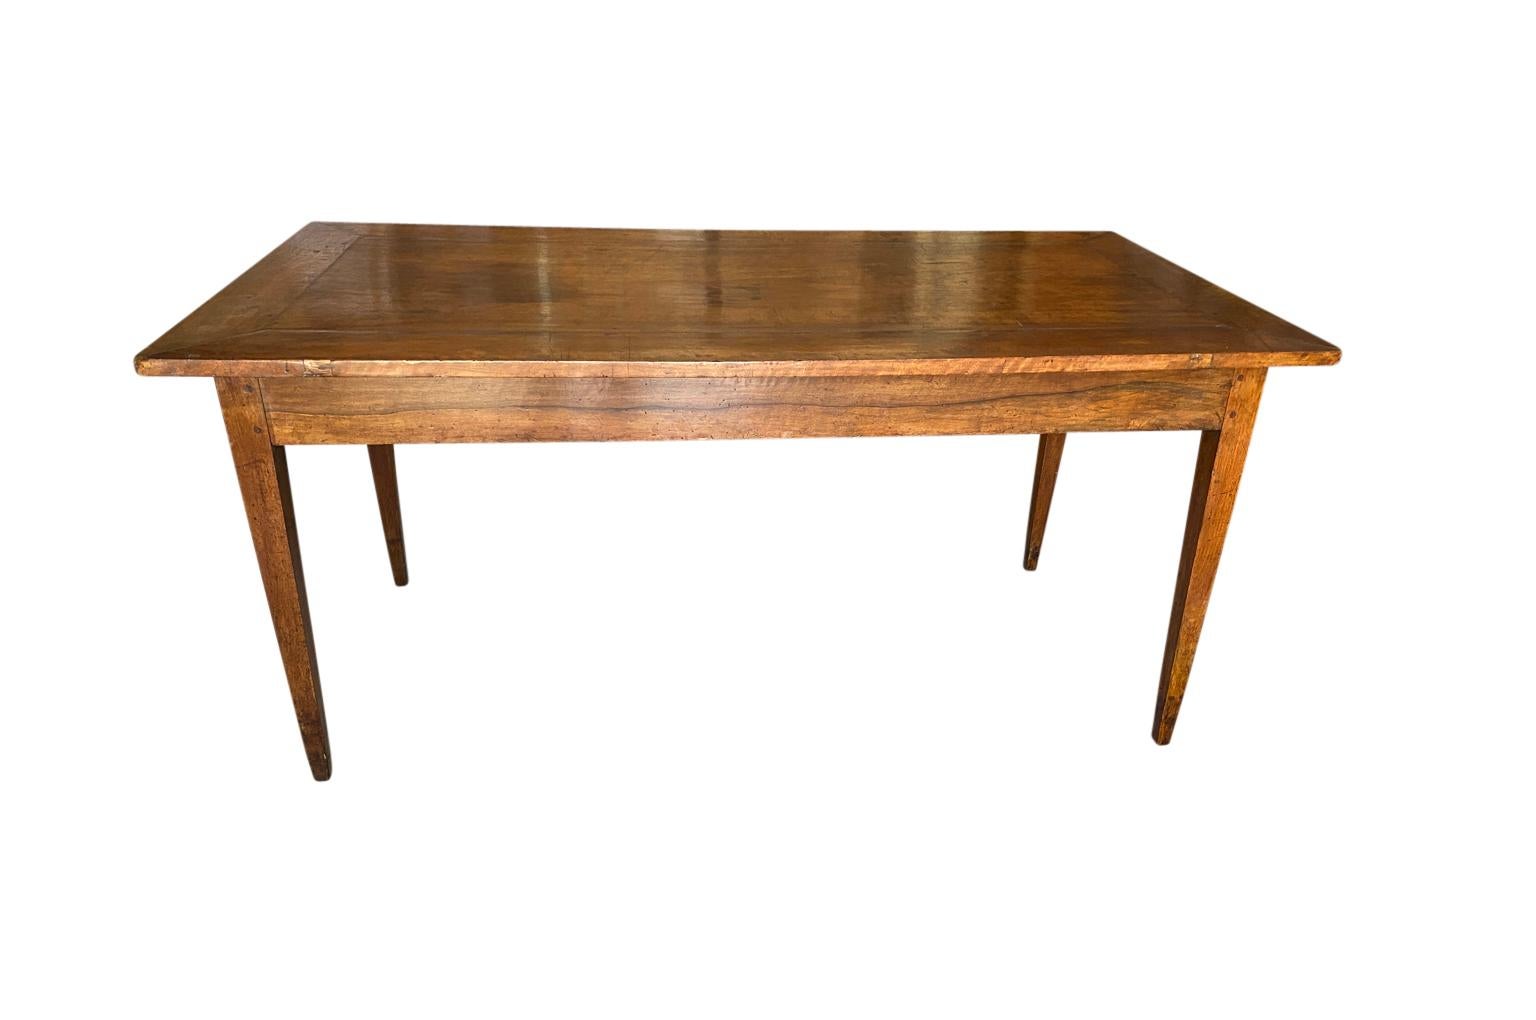 A stunning 18th century table - Console from Venice, Italy. Beautifully constructed from wonderful walnut with very minimalist lines. The table has 2 drawers - one at each end and elegant tapered legs. Fabulous patina. This table will serve